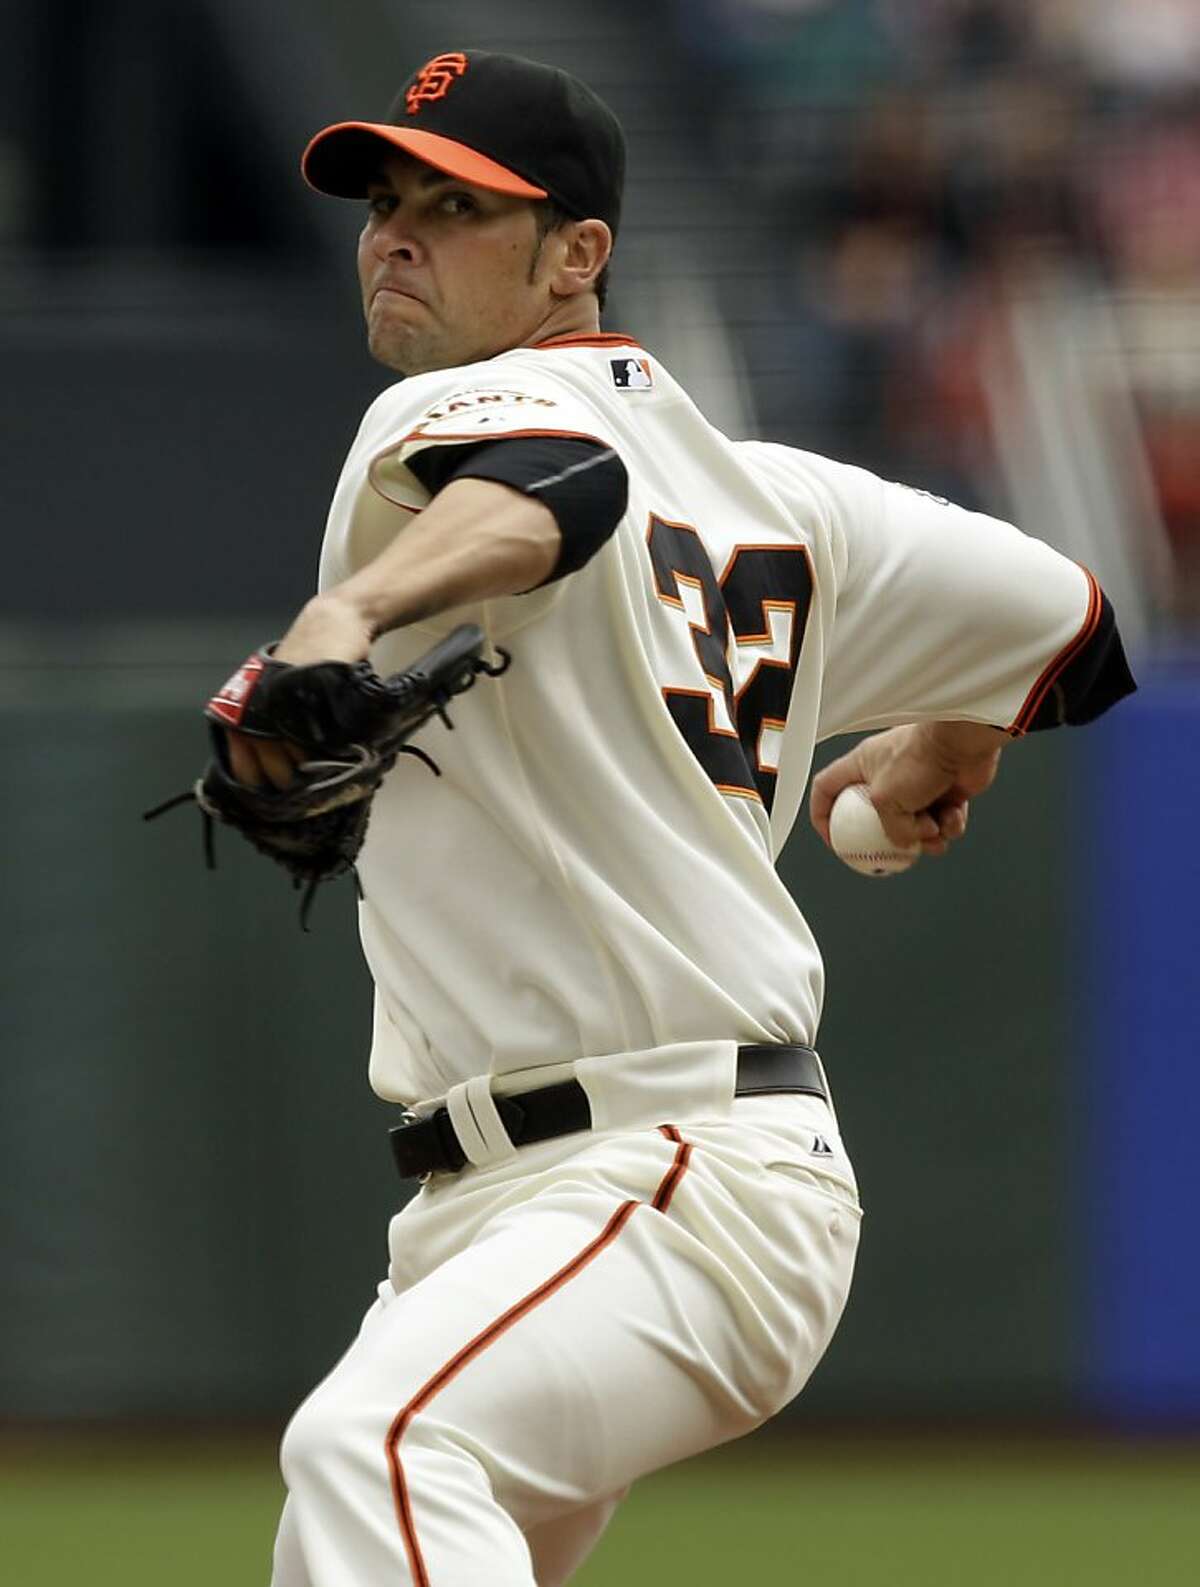 San Francisco Giants pitcher Ryan Vogelsong (32) throws to the Colorado Rockies during the first inning of a baseball game in San Francisco, Sunday, June 5, 2011.